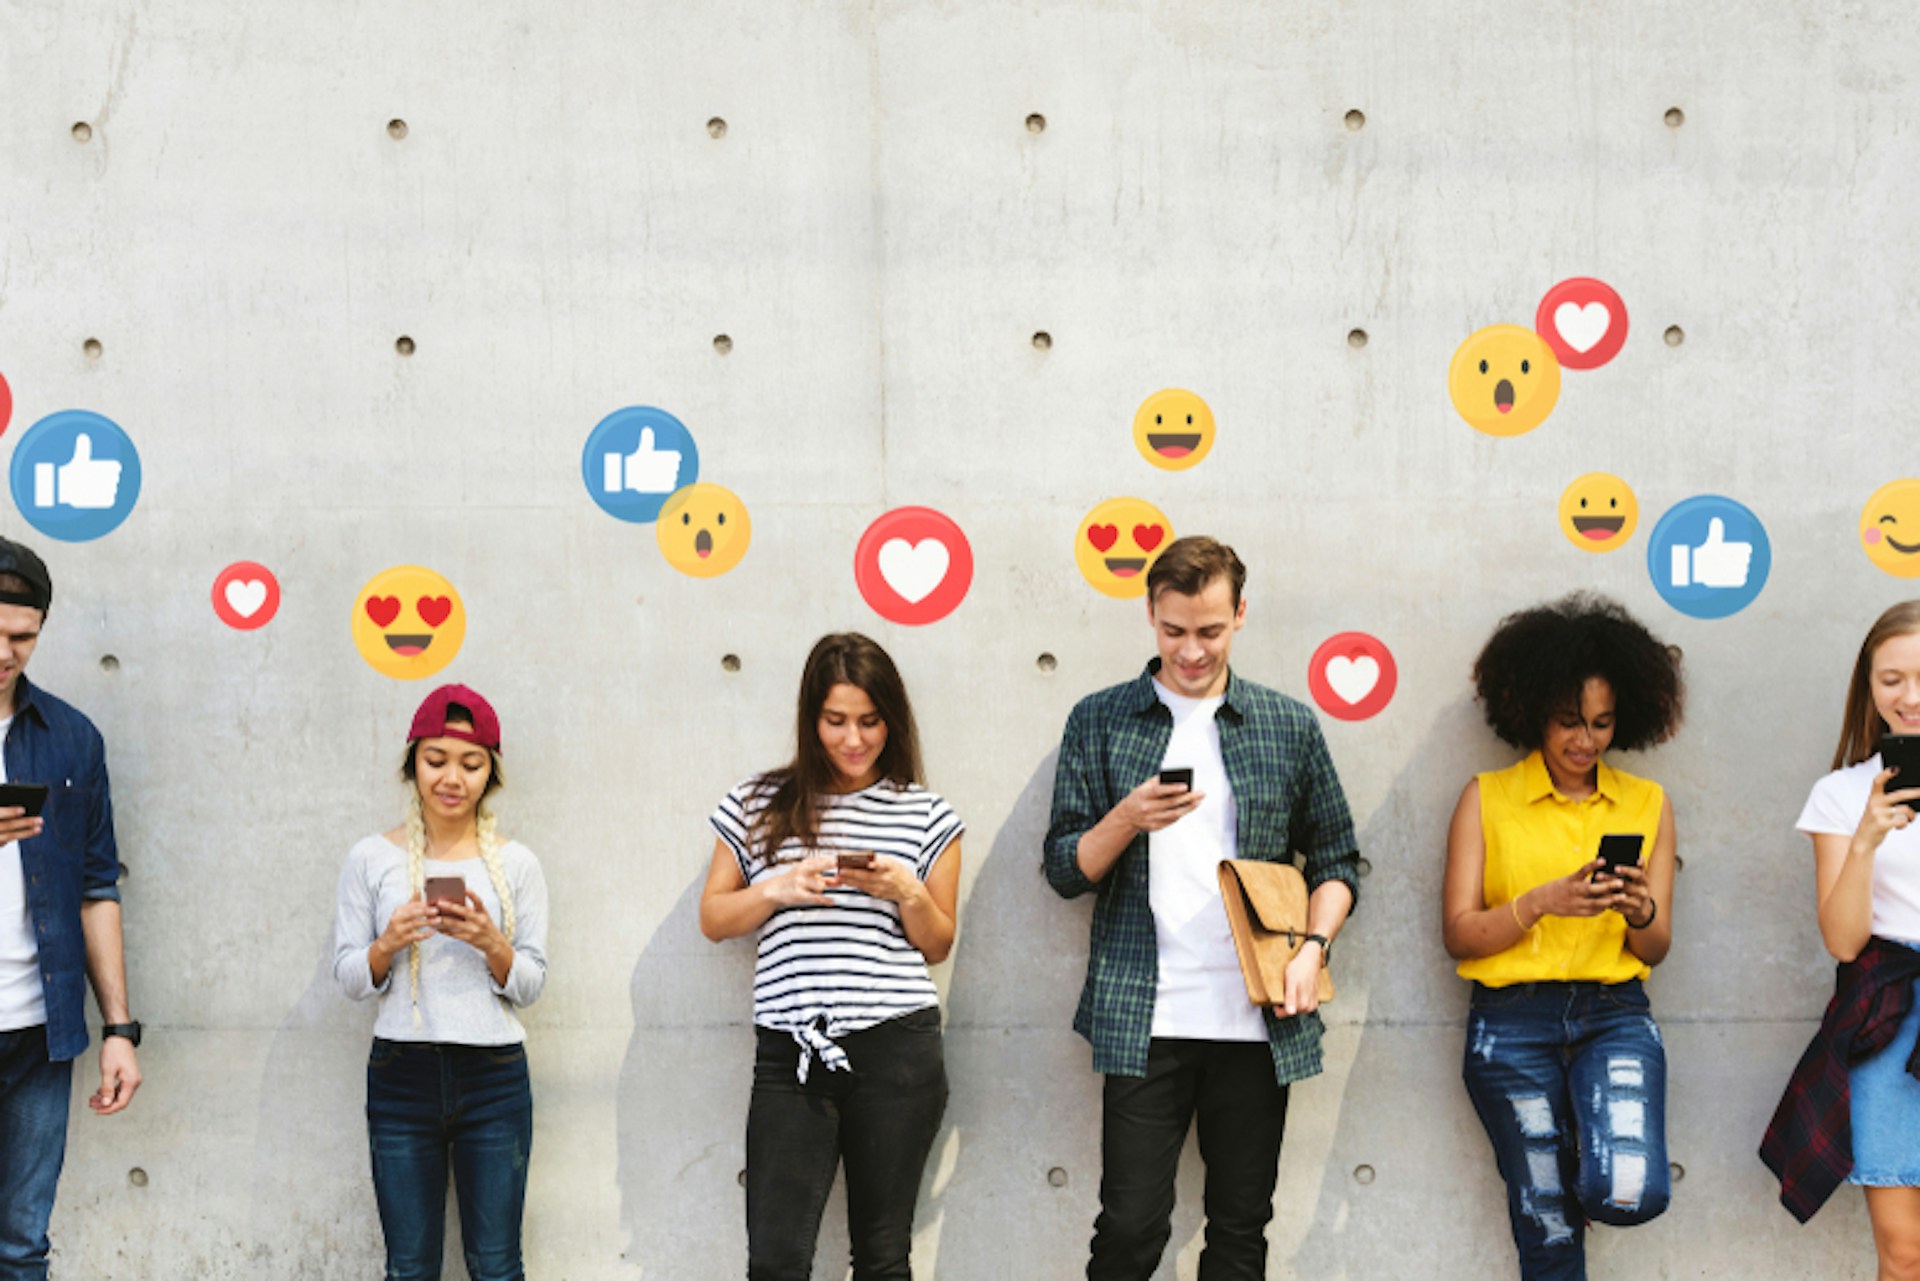 People using smartphones lined up against a wall. Facebook reactions are illustrated above them